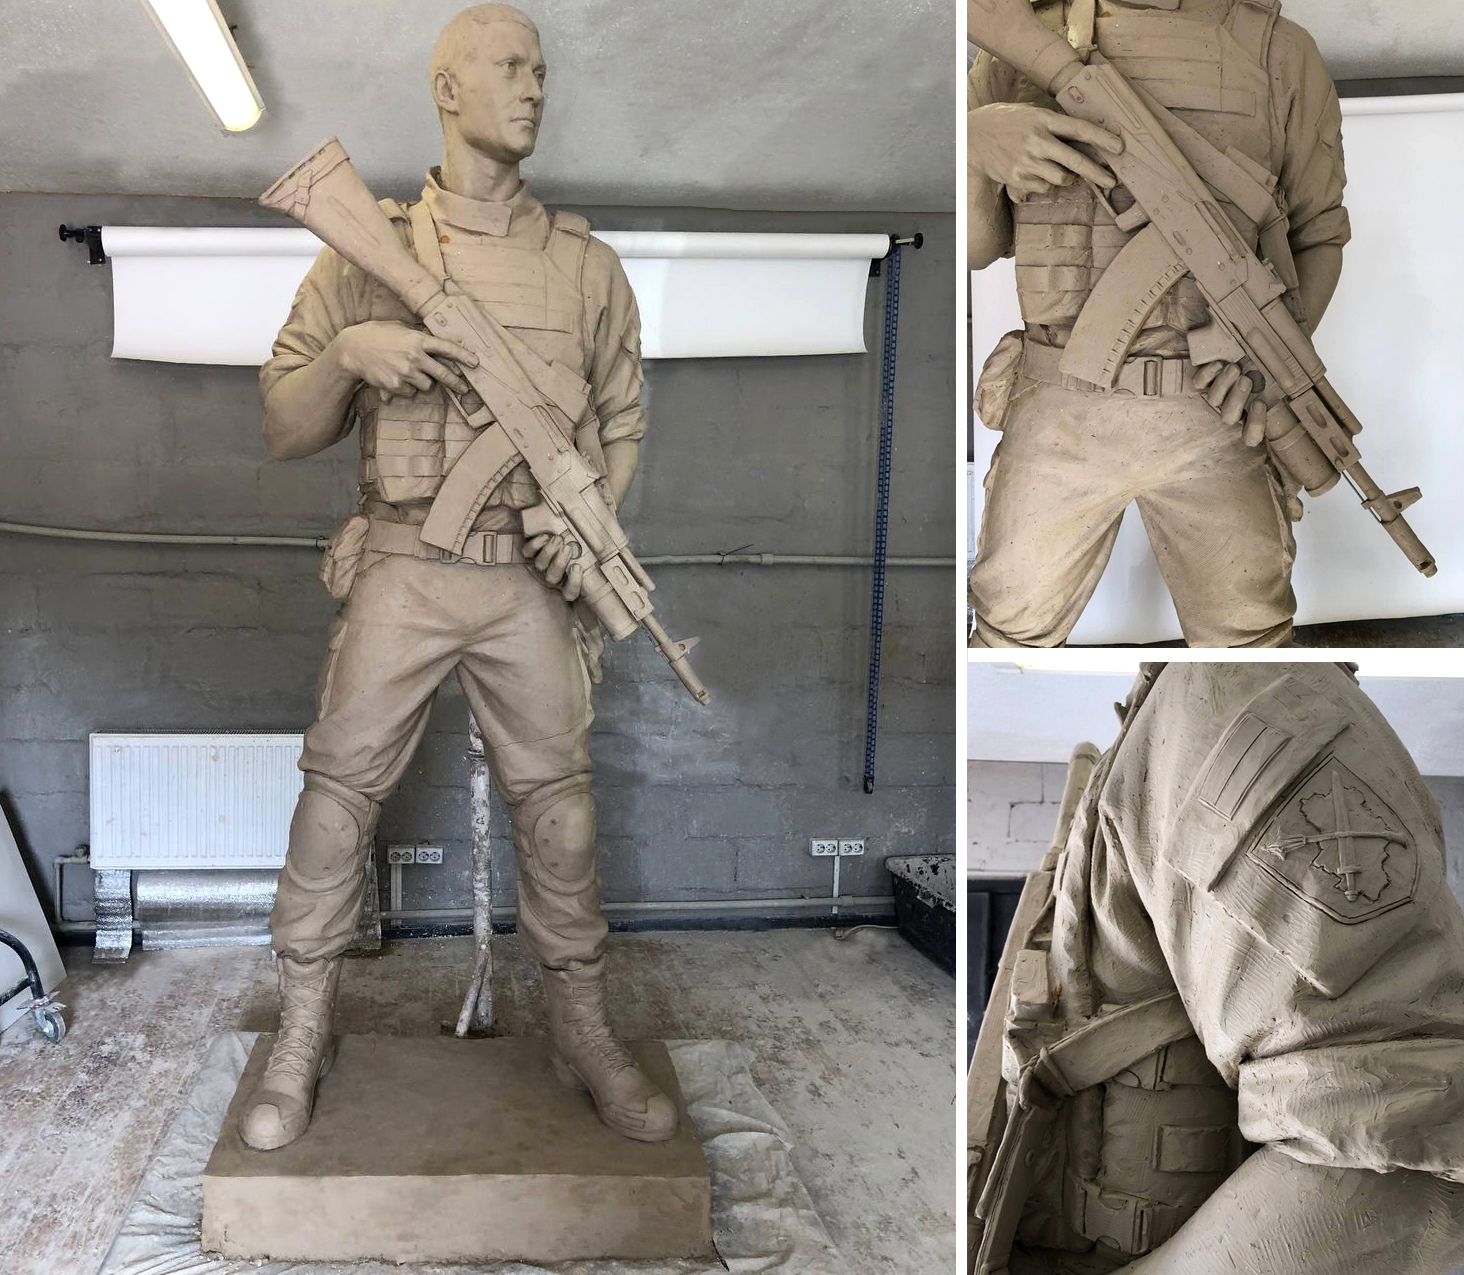 Monuments to the military, soldiers of the Armed Forces of Ukraine